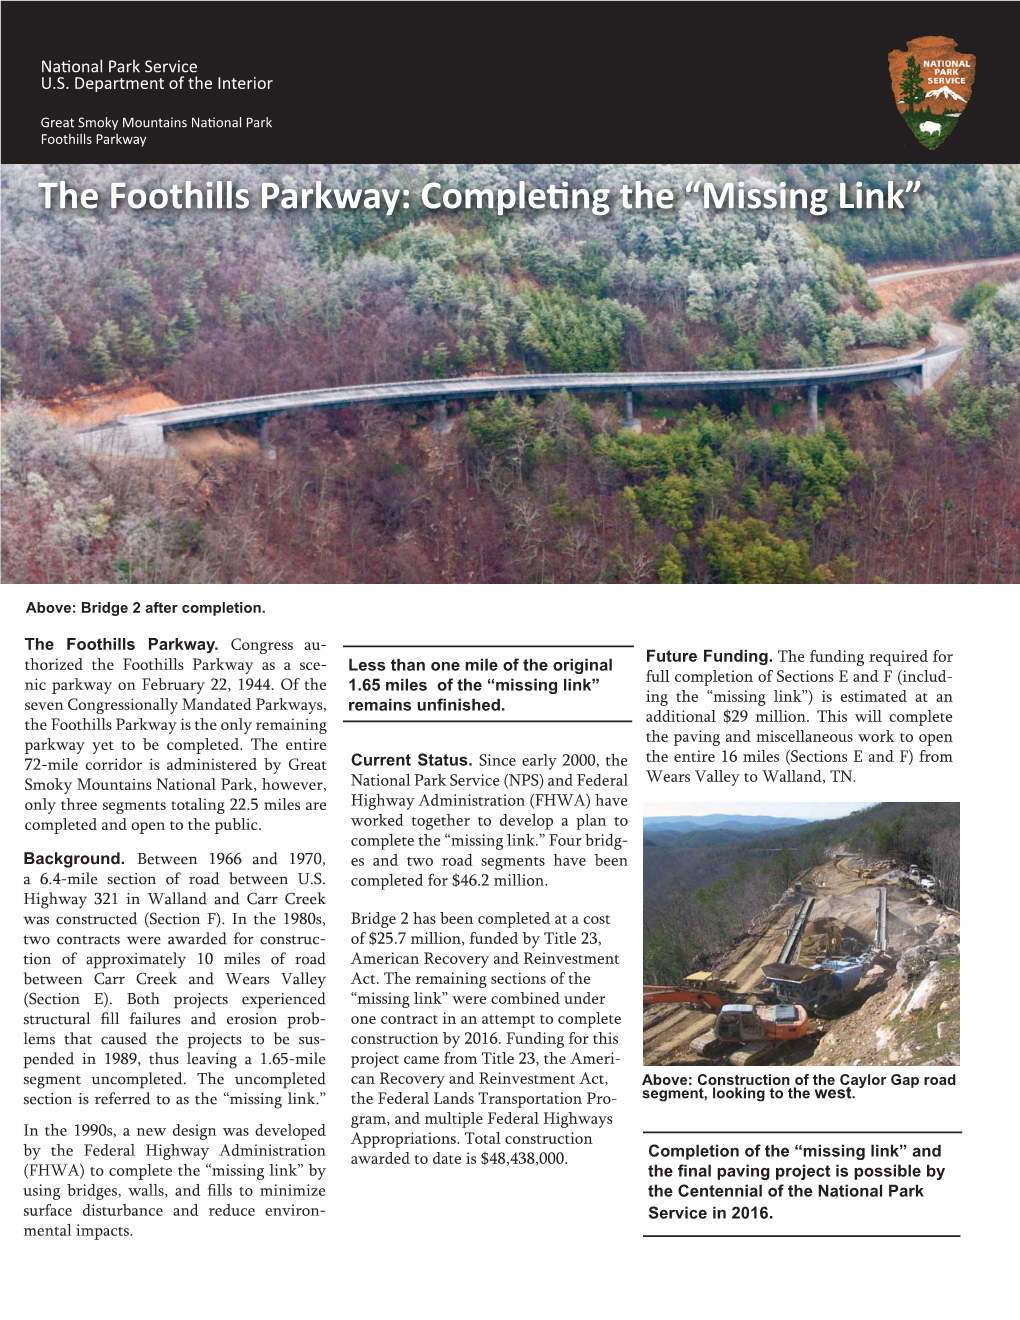 The Foothills Parkway: Compleɵ Ng the “Missing Link”